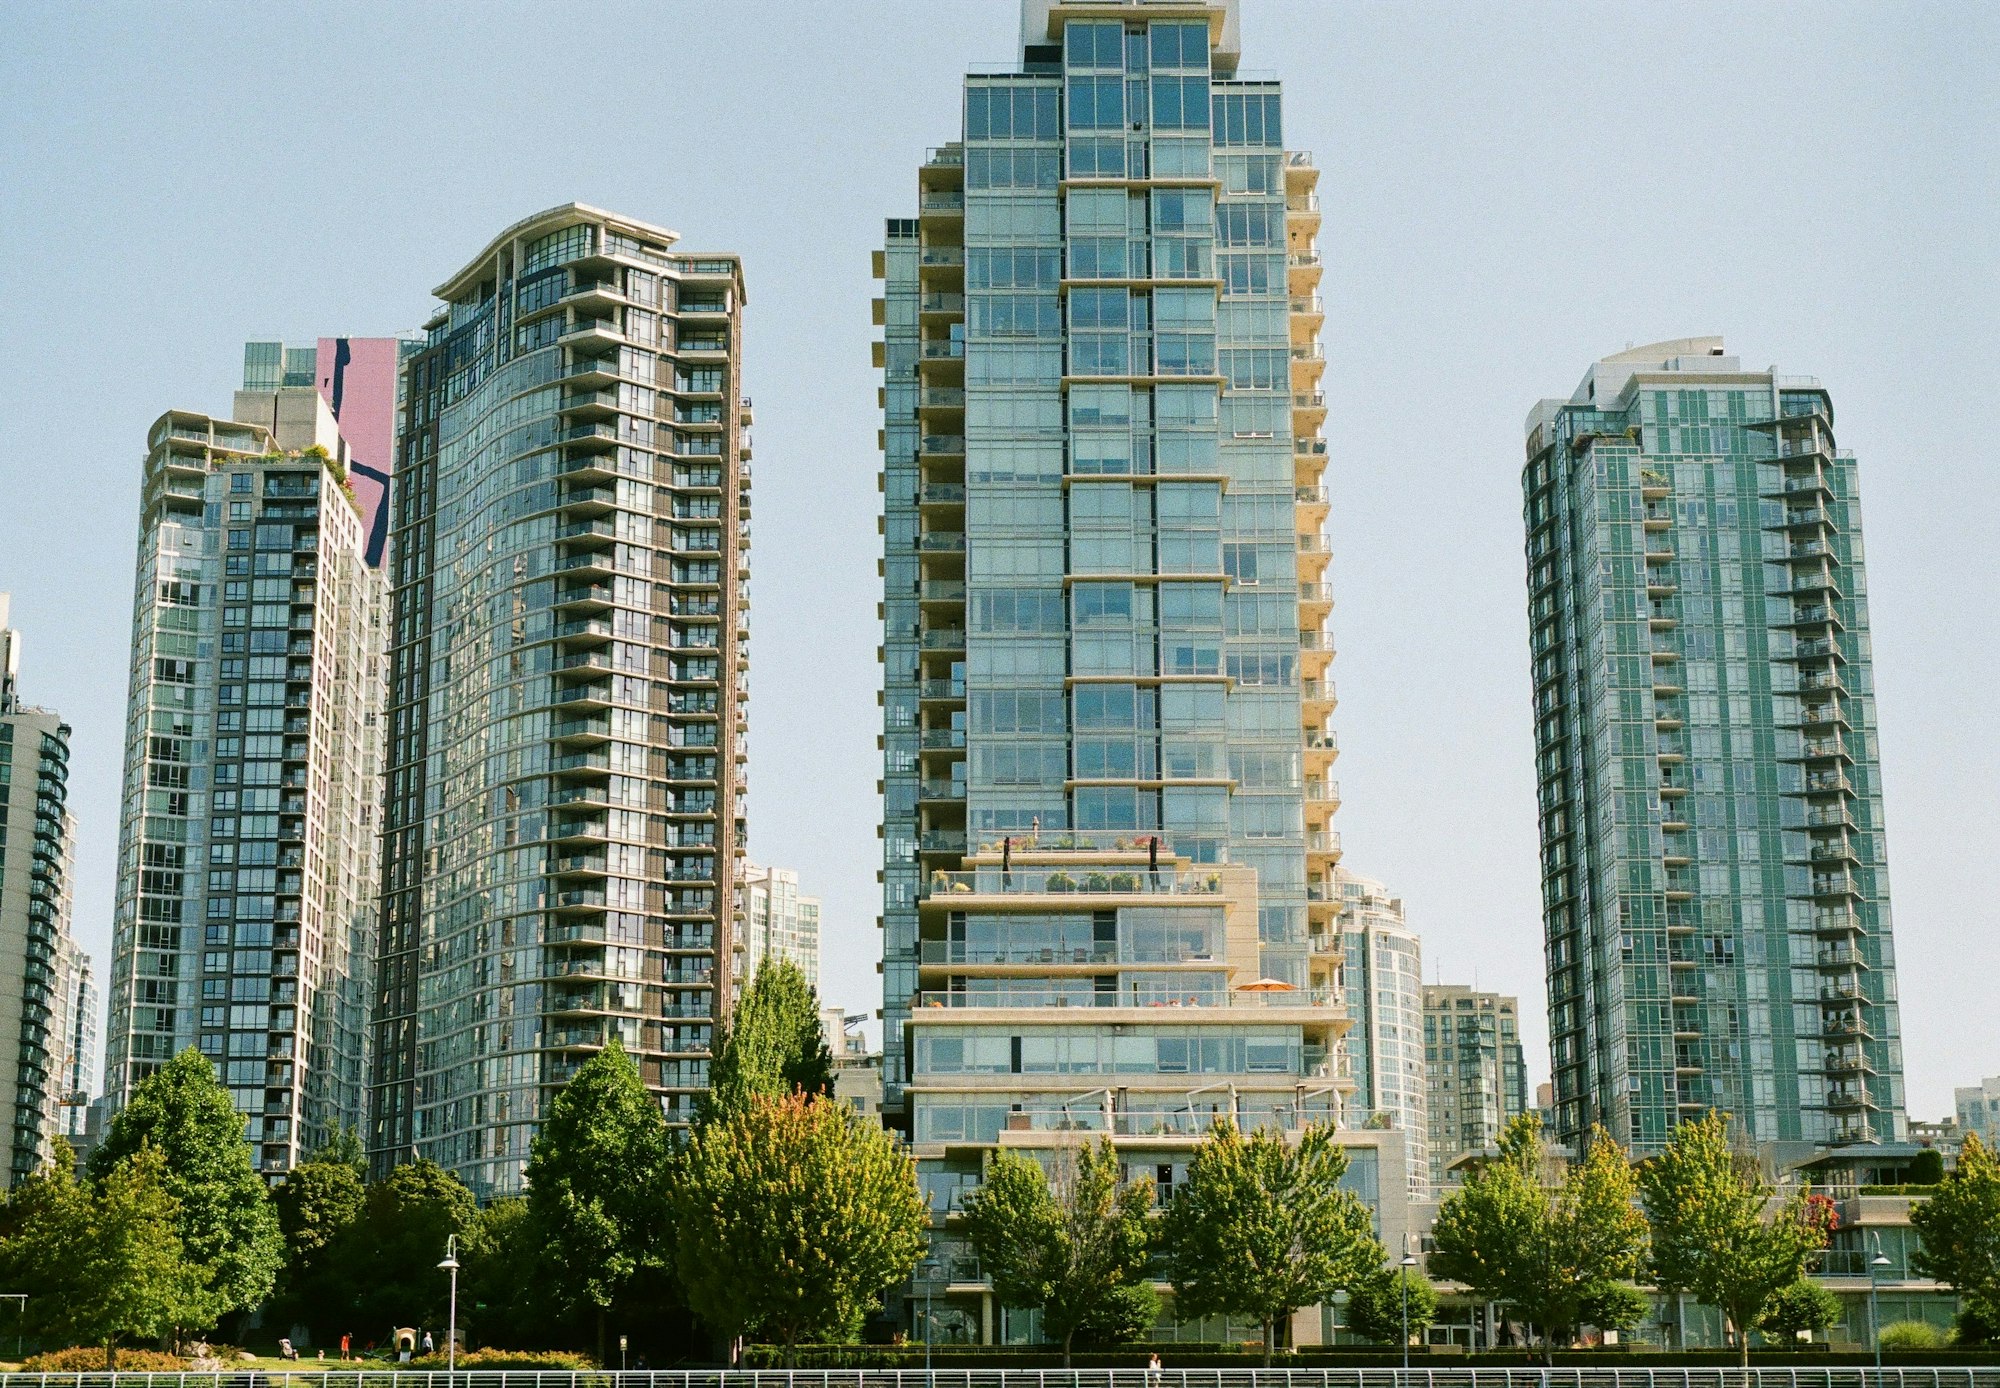 A shot taken with my Minolta during my trip in Vancouver this summer. Follow my insta page: @pleindephotos